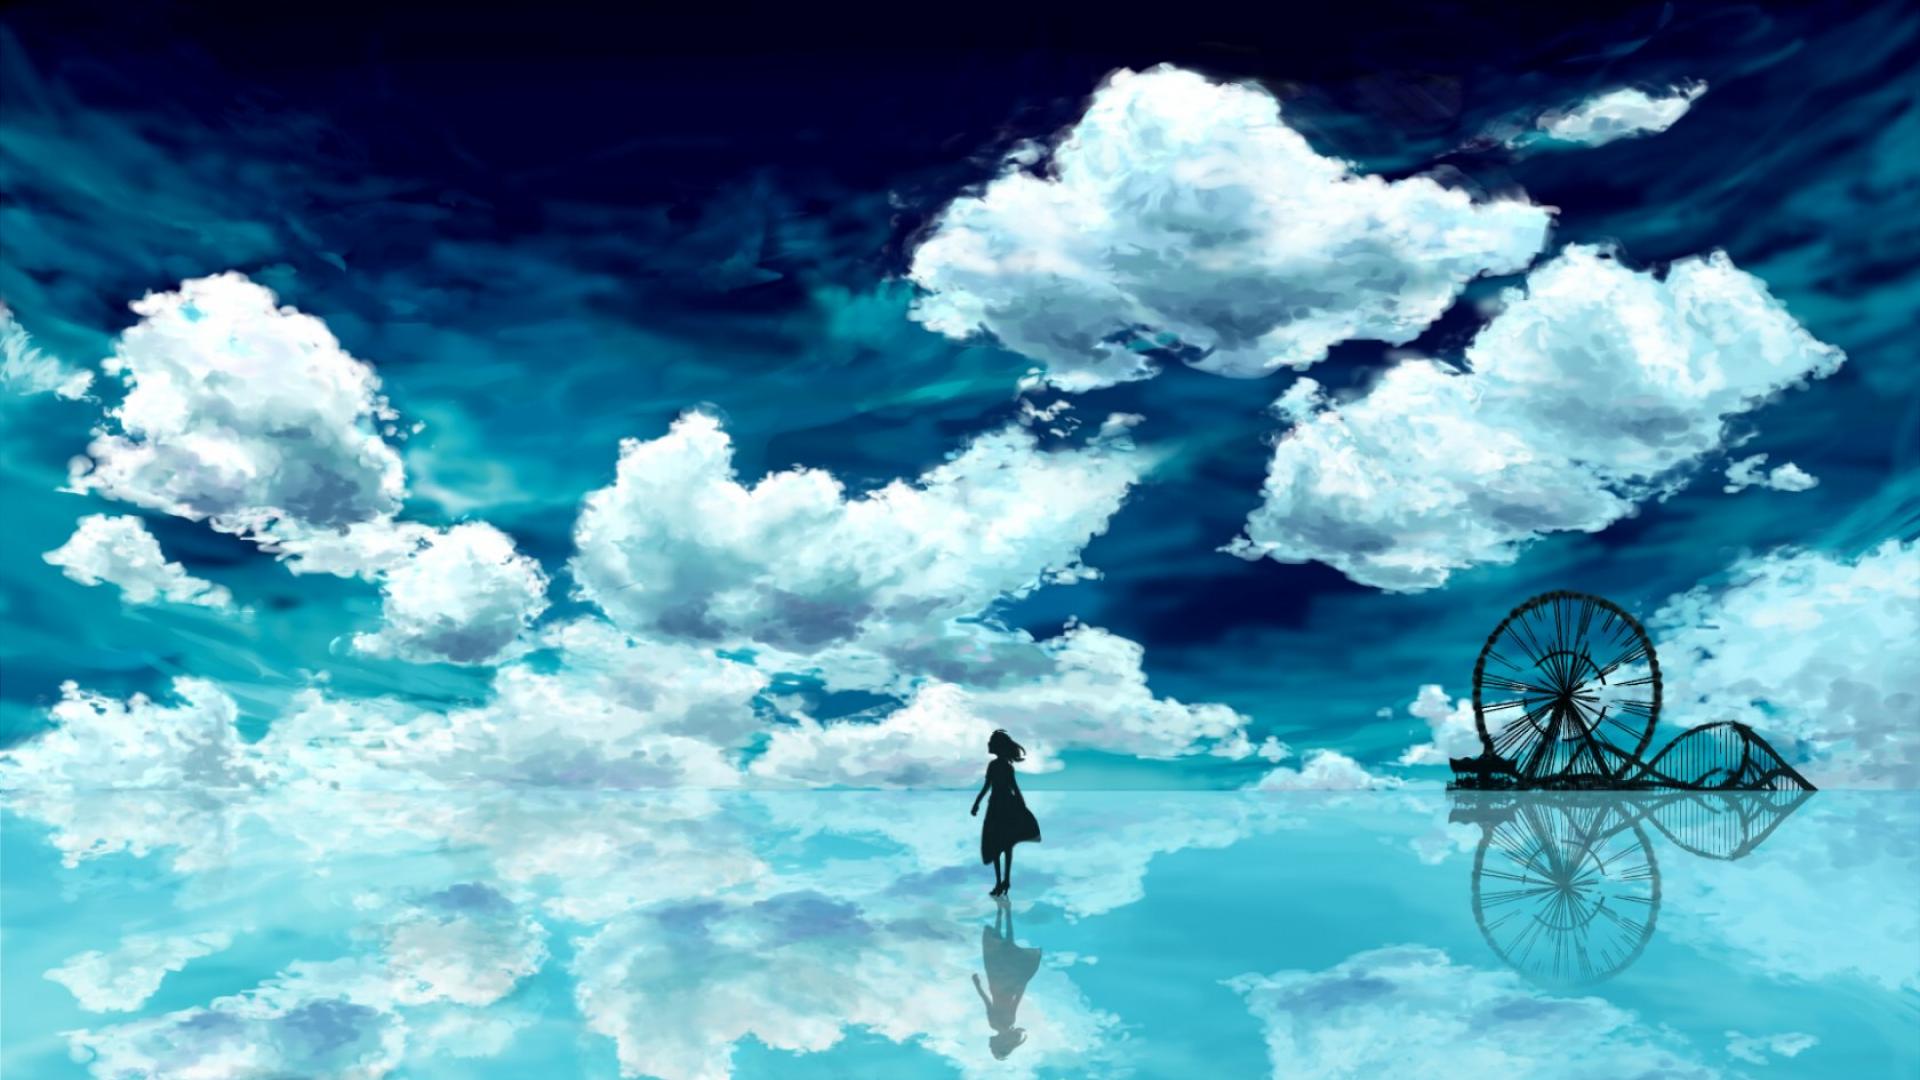 animes wallpapers full hd,sky,cloud,natural landscape,daytime,water